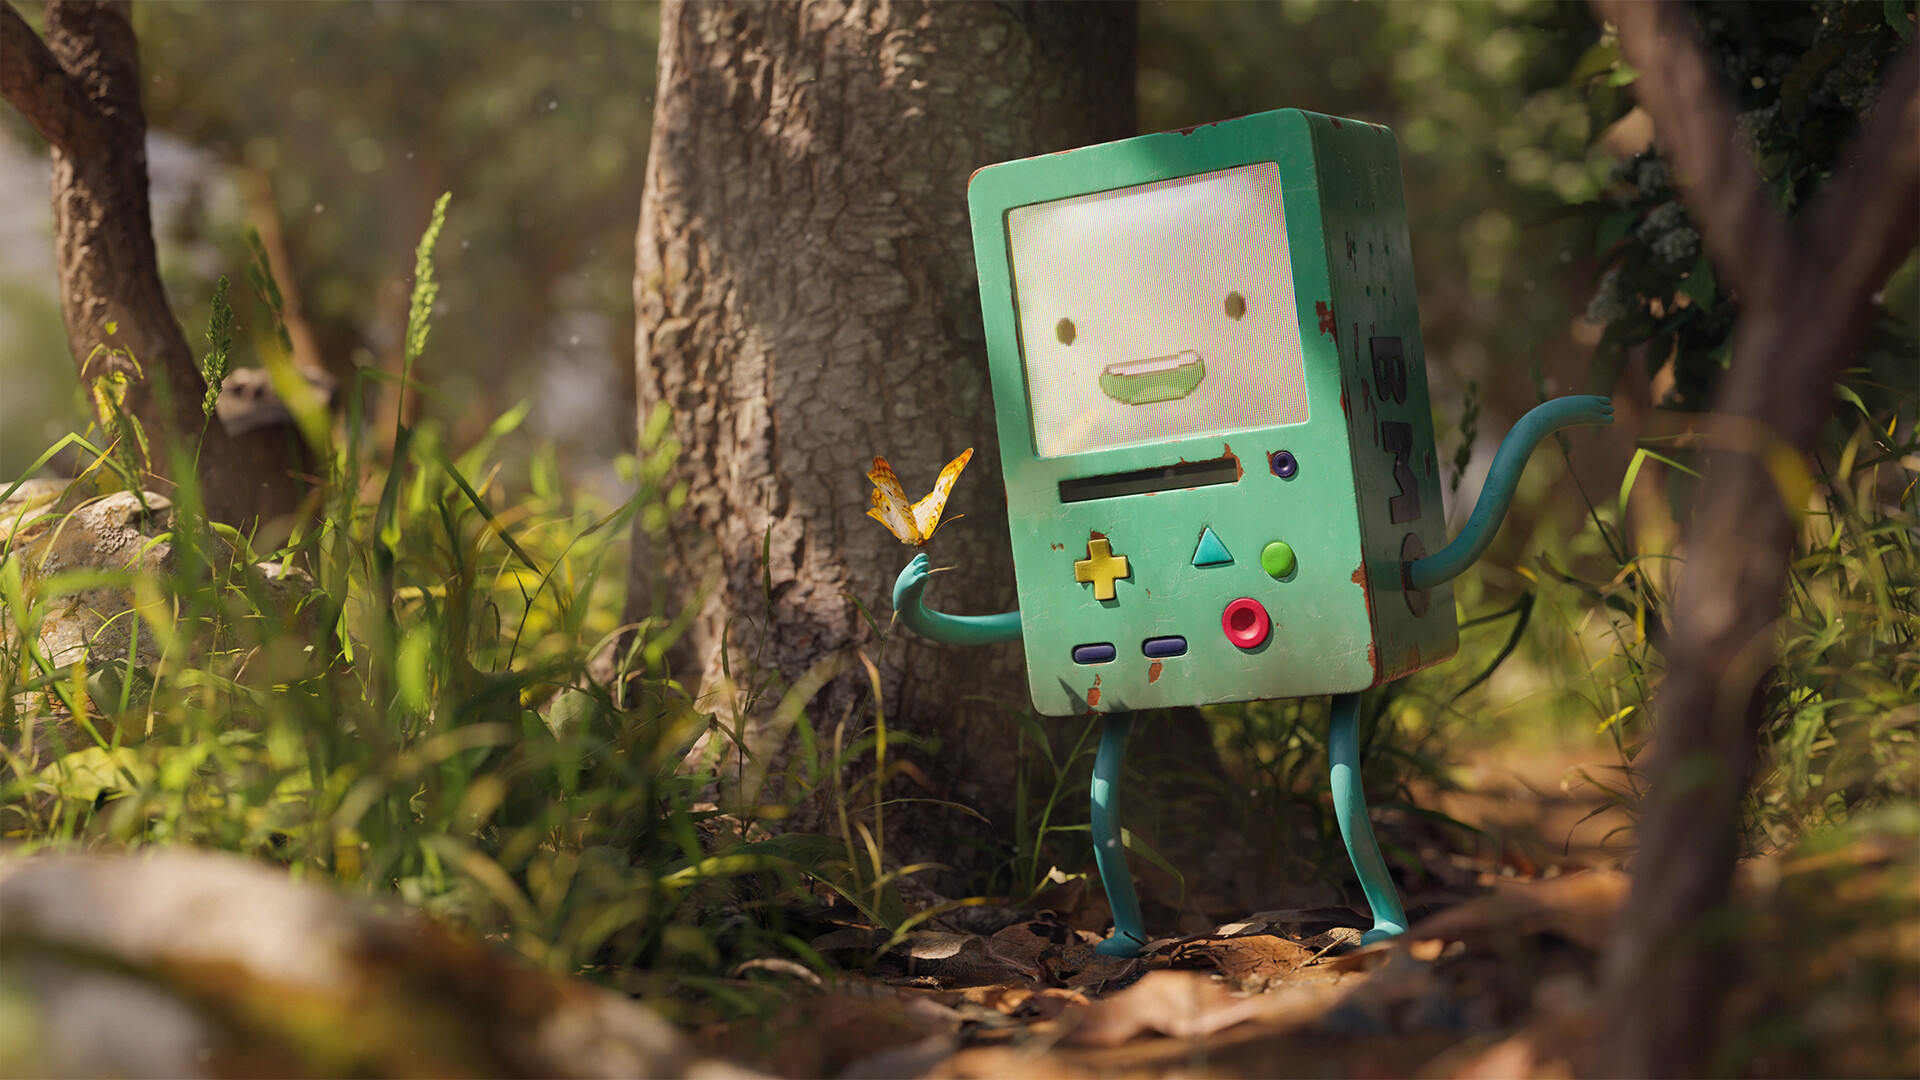 Adventure Time BMO Wallpapers  Top Free Adventure Time BMO Backgrounds   WallpaperAccess